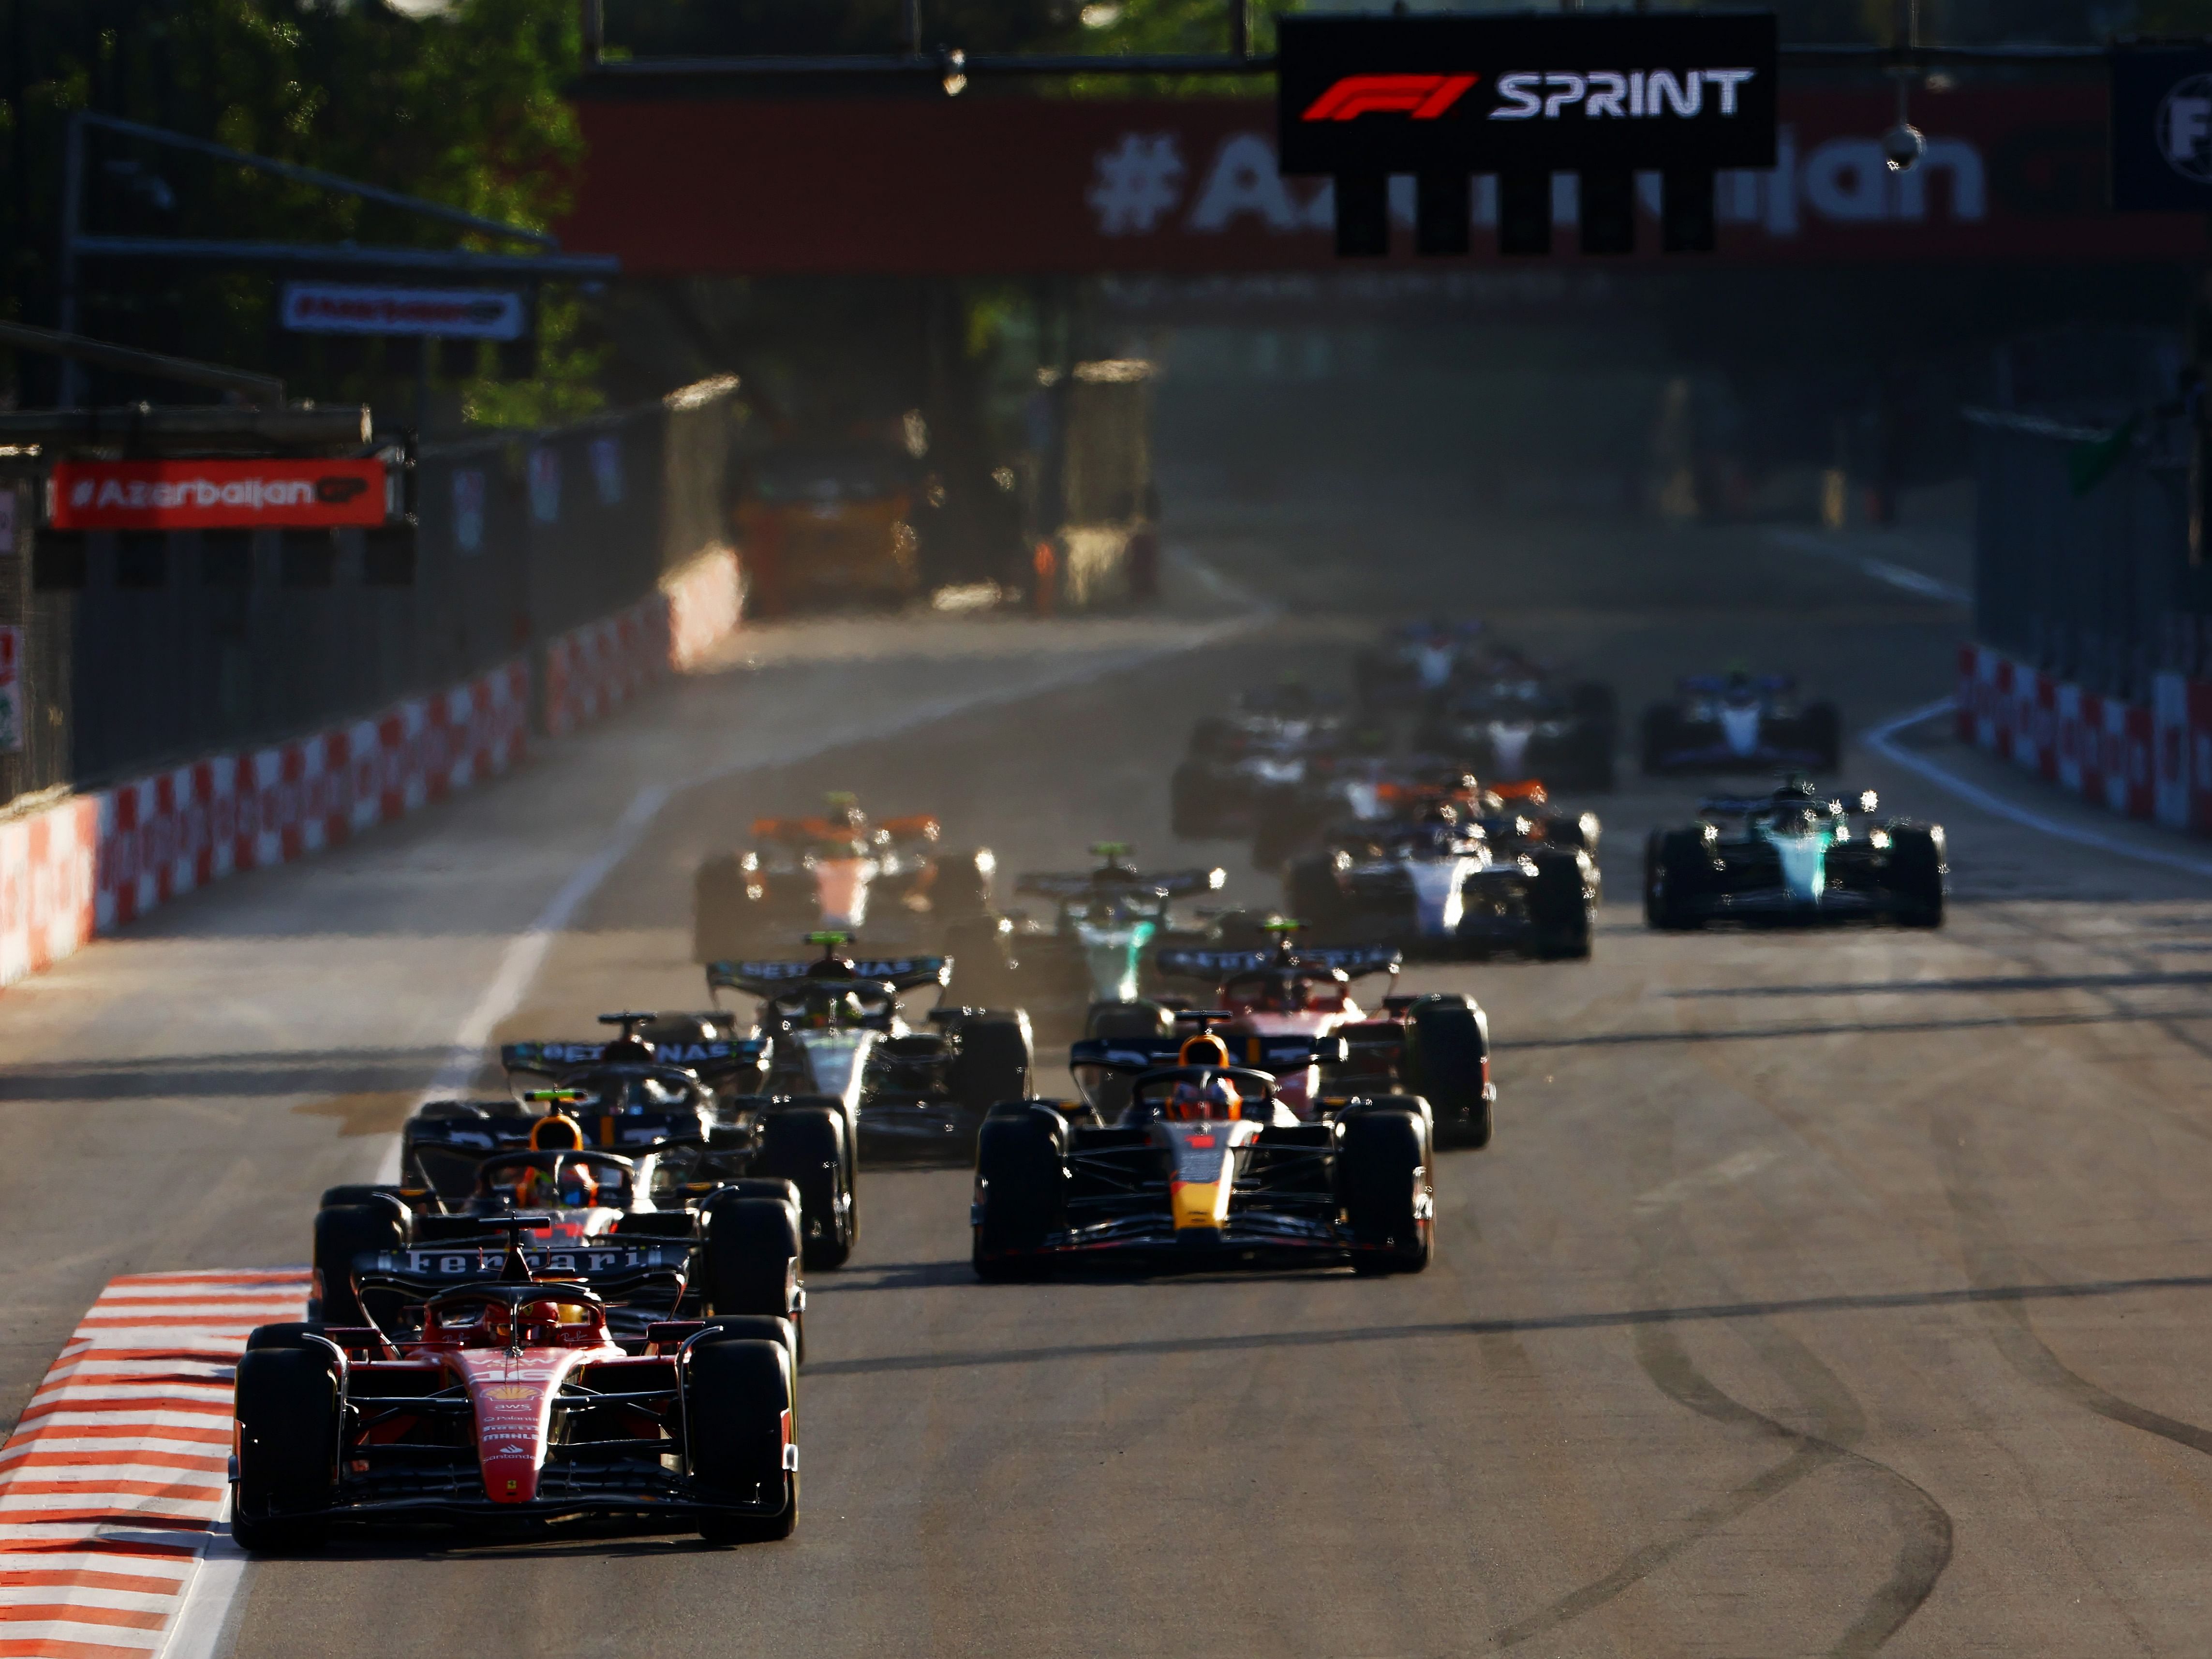 Charles Leclerc (16) leads Sergio Perez (11) and the rest of the field at the start during the Sprint ahead of the 2023 F1 Azerbaijan Grand Prix. (Photo by Mark Thompson/Getty Images)